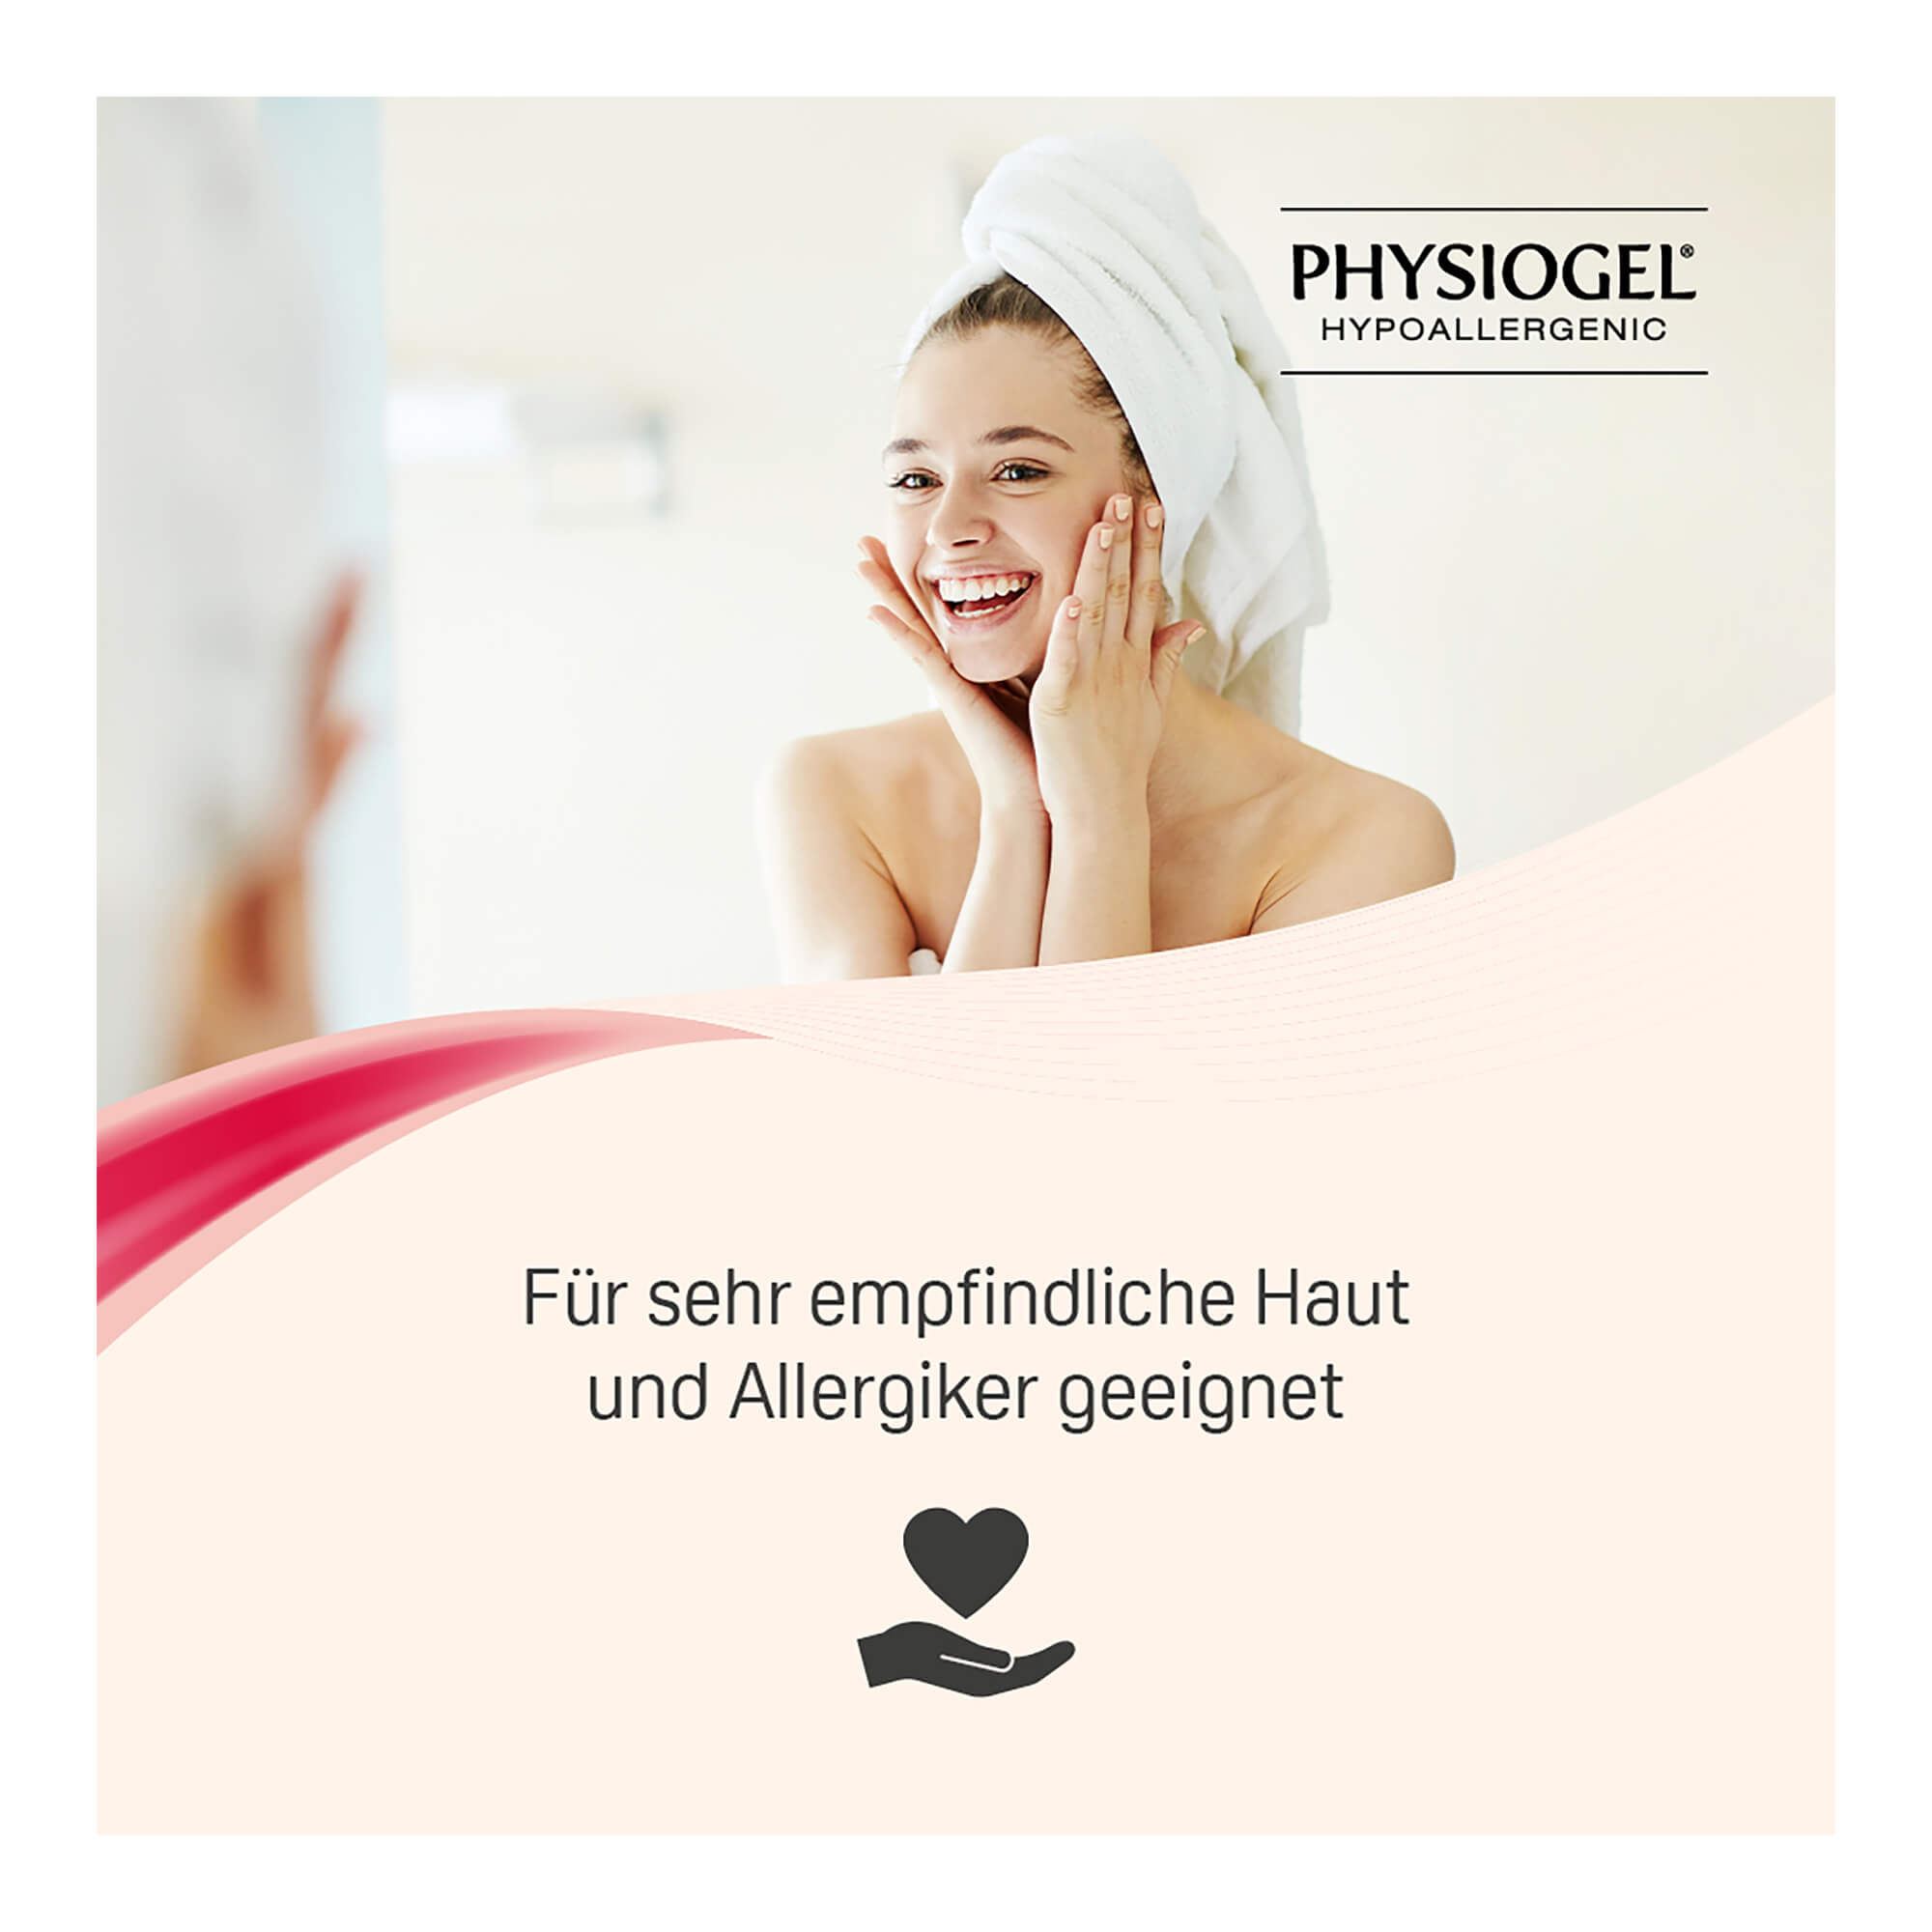 Physiogel Calming Relief Gesichtscreme